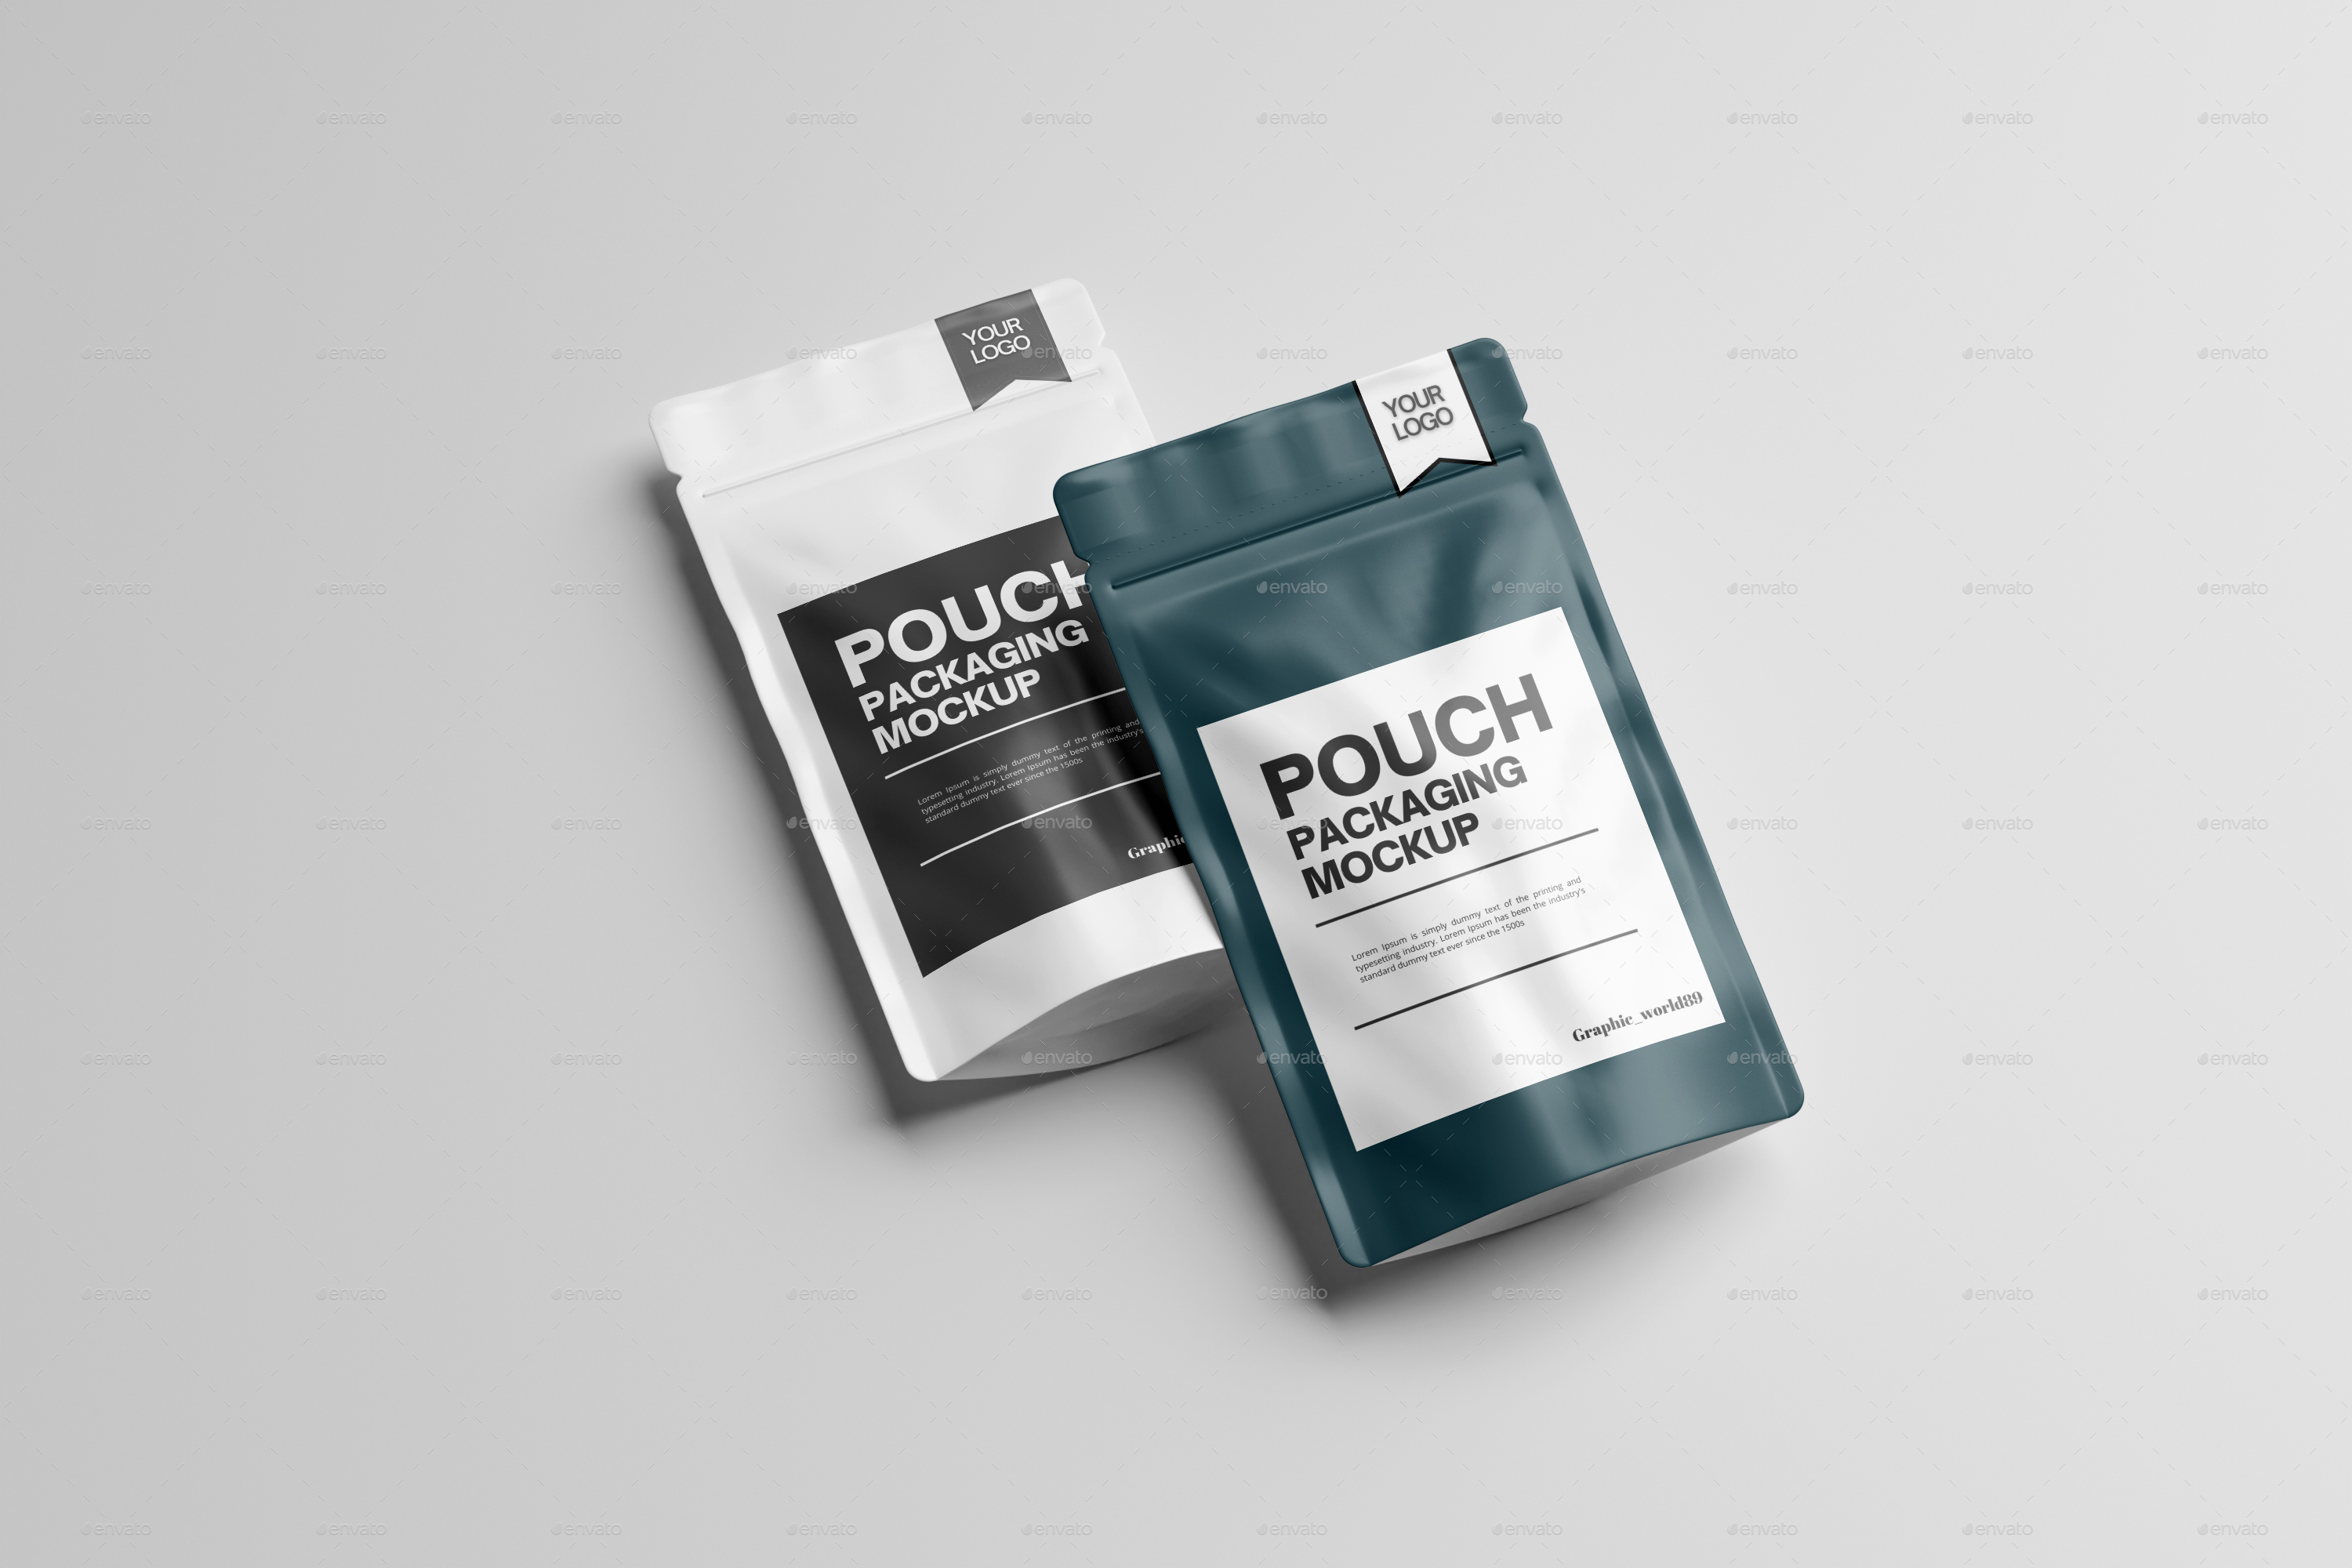 Pouch Packaging Mockup by Graphic_World89 | GraphicRiver